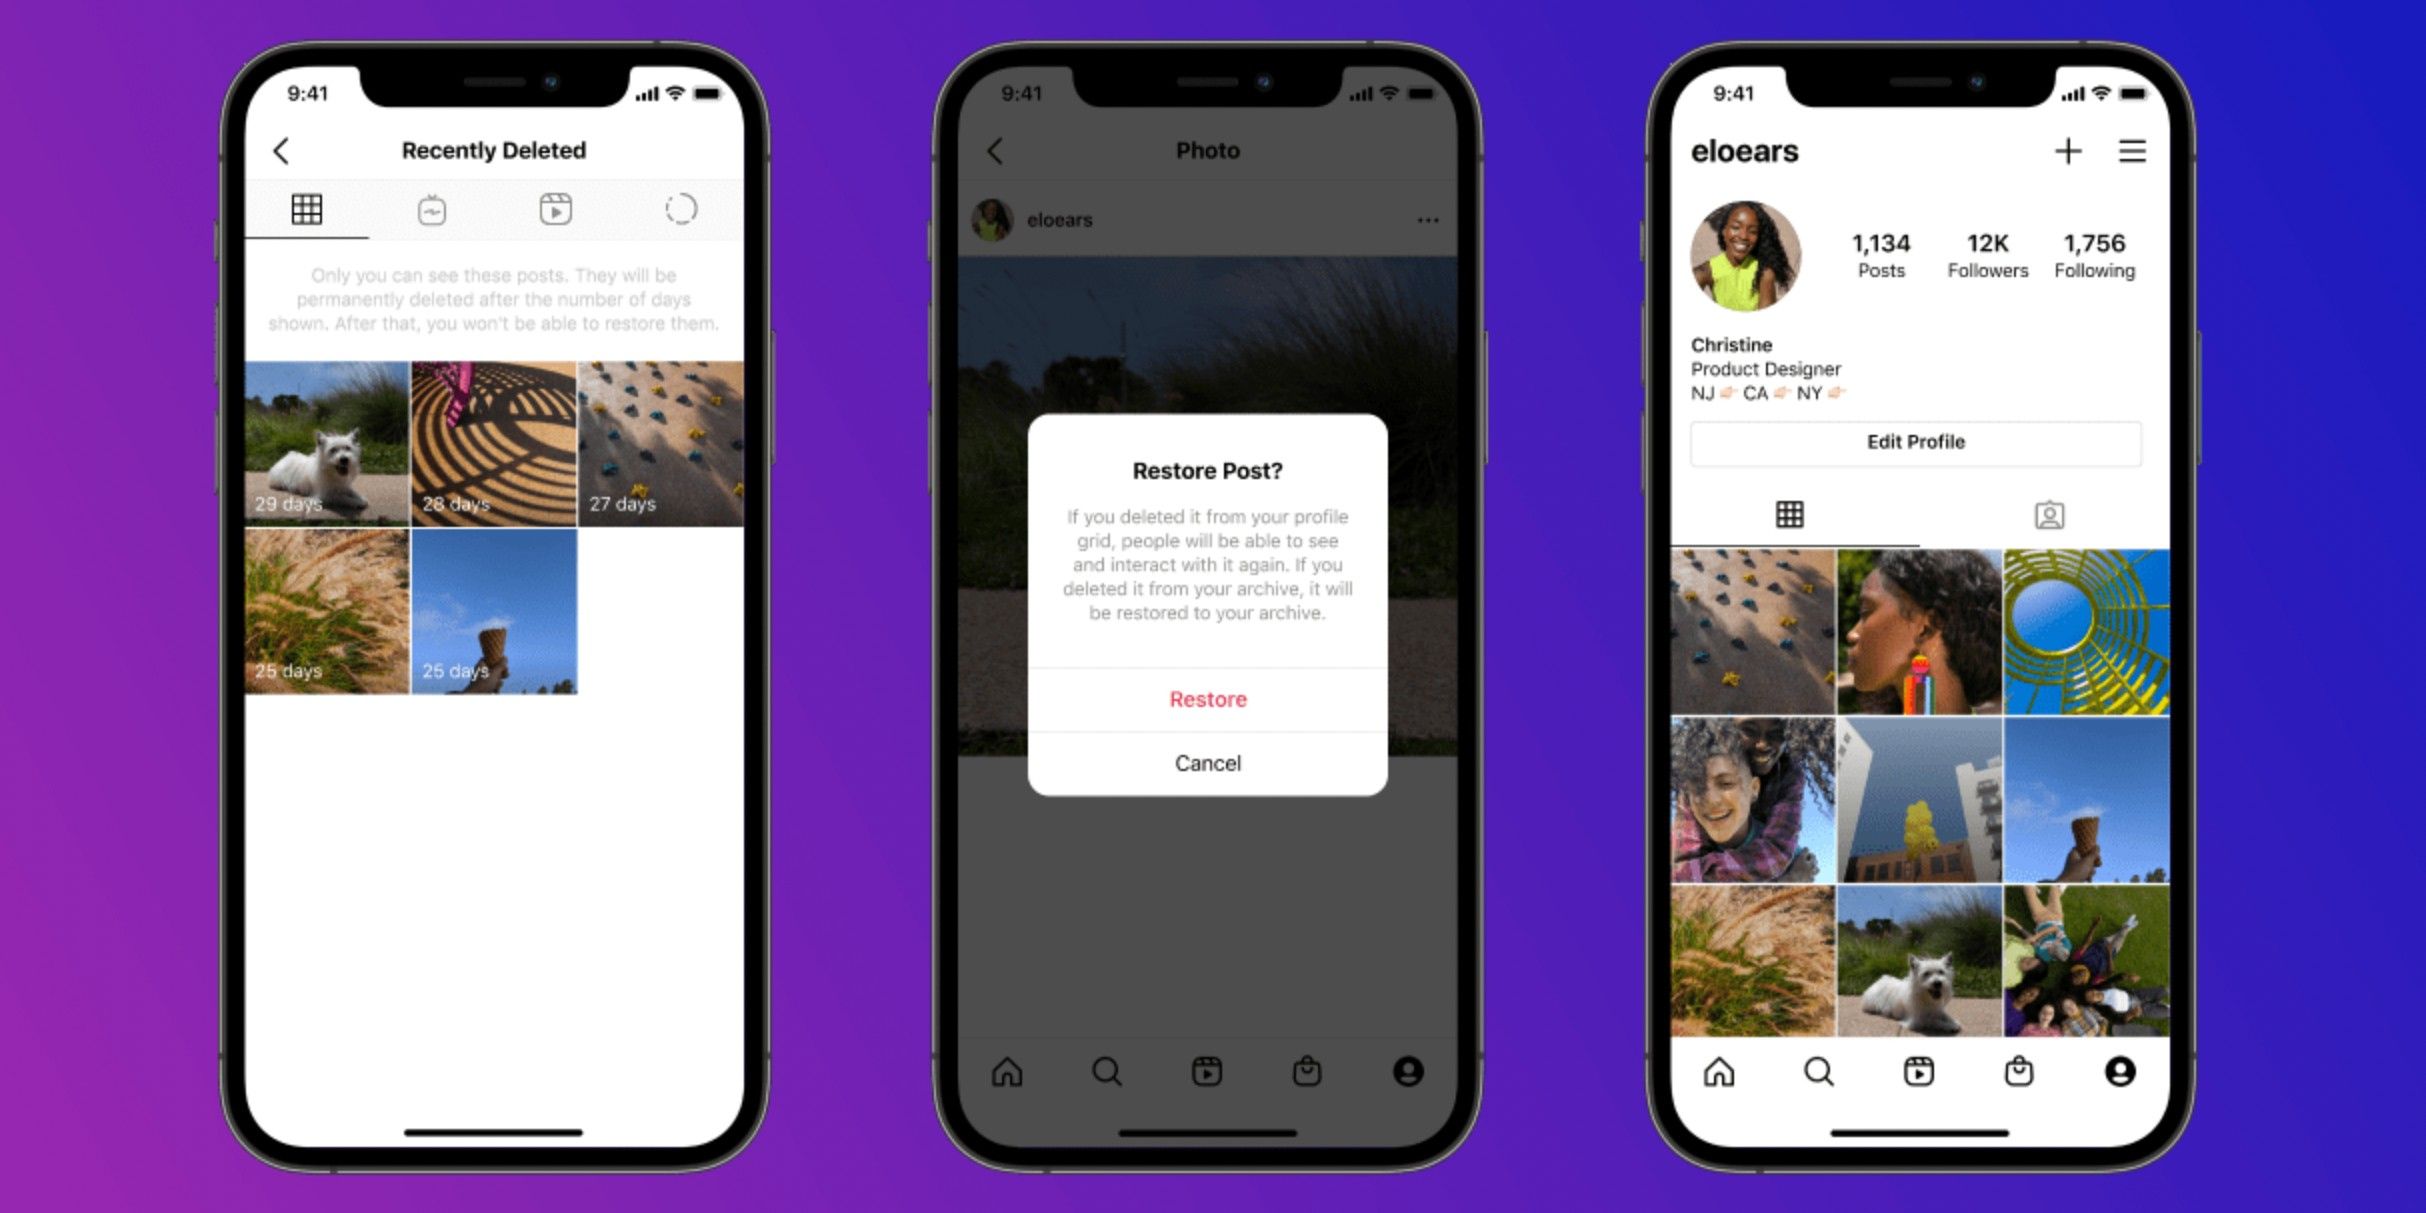 How To Restore Deleted Content On Instagram